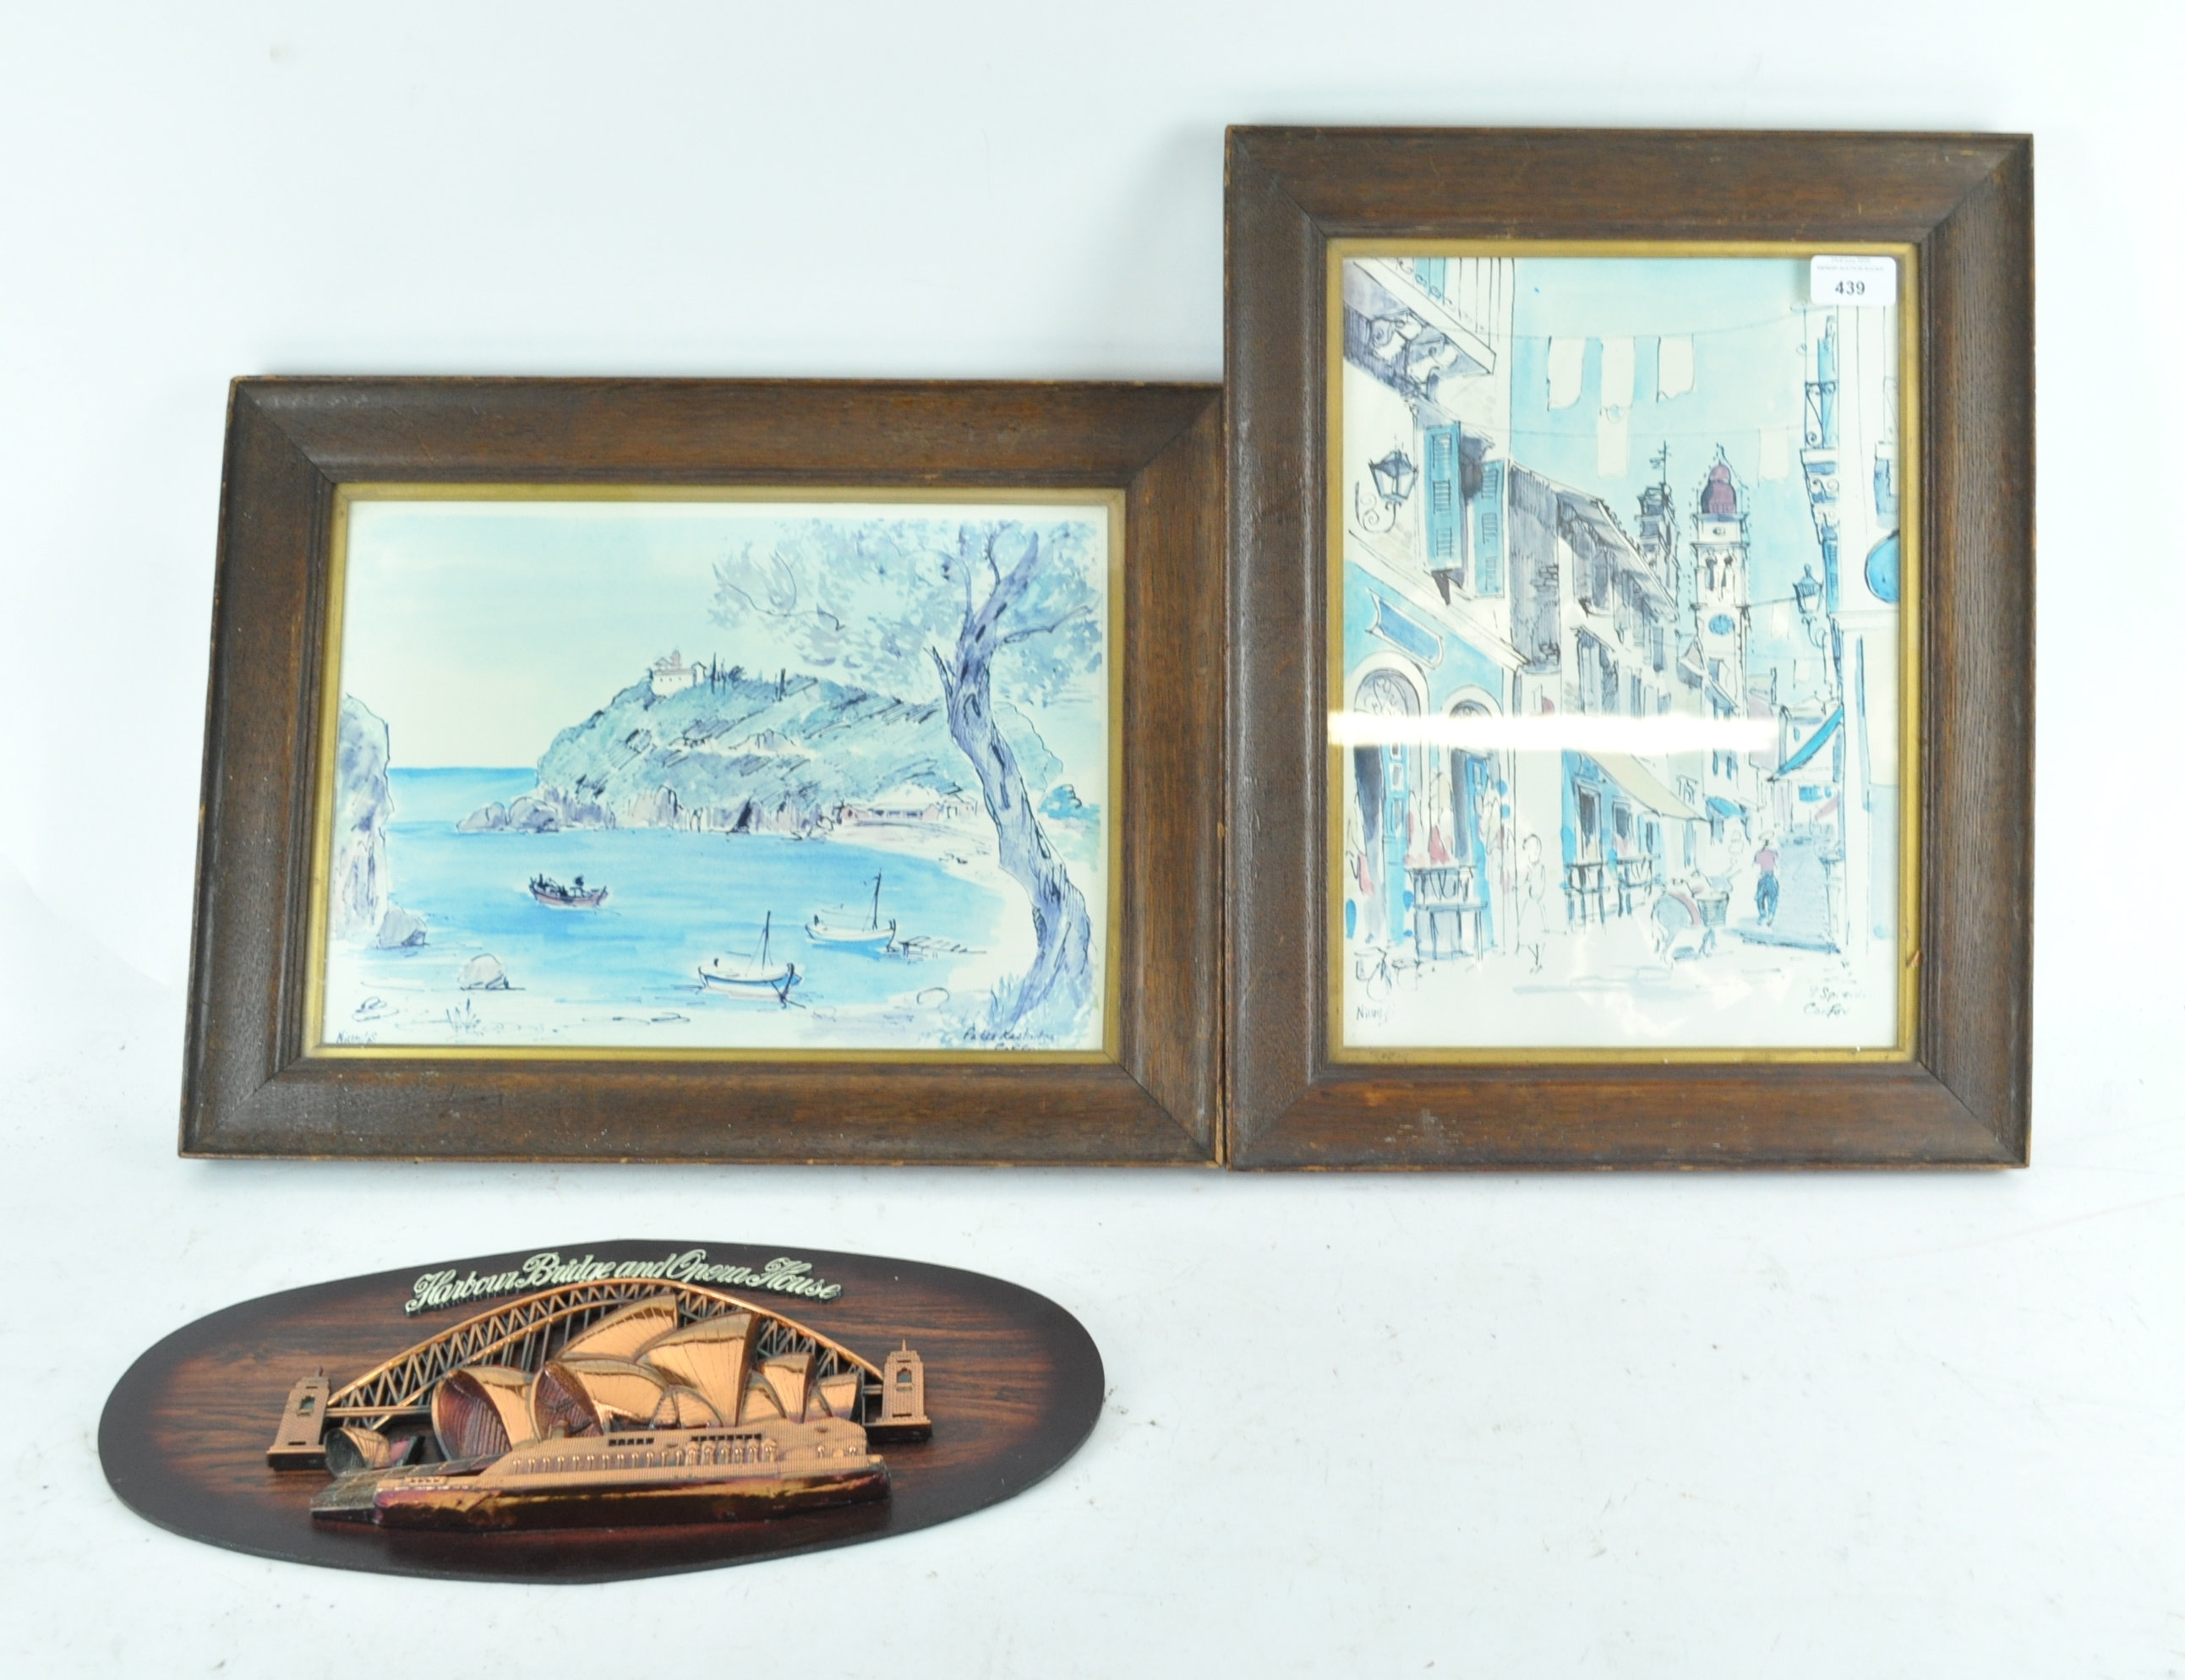 A pair of pictures and an Australian plaque